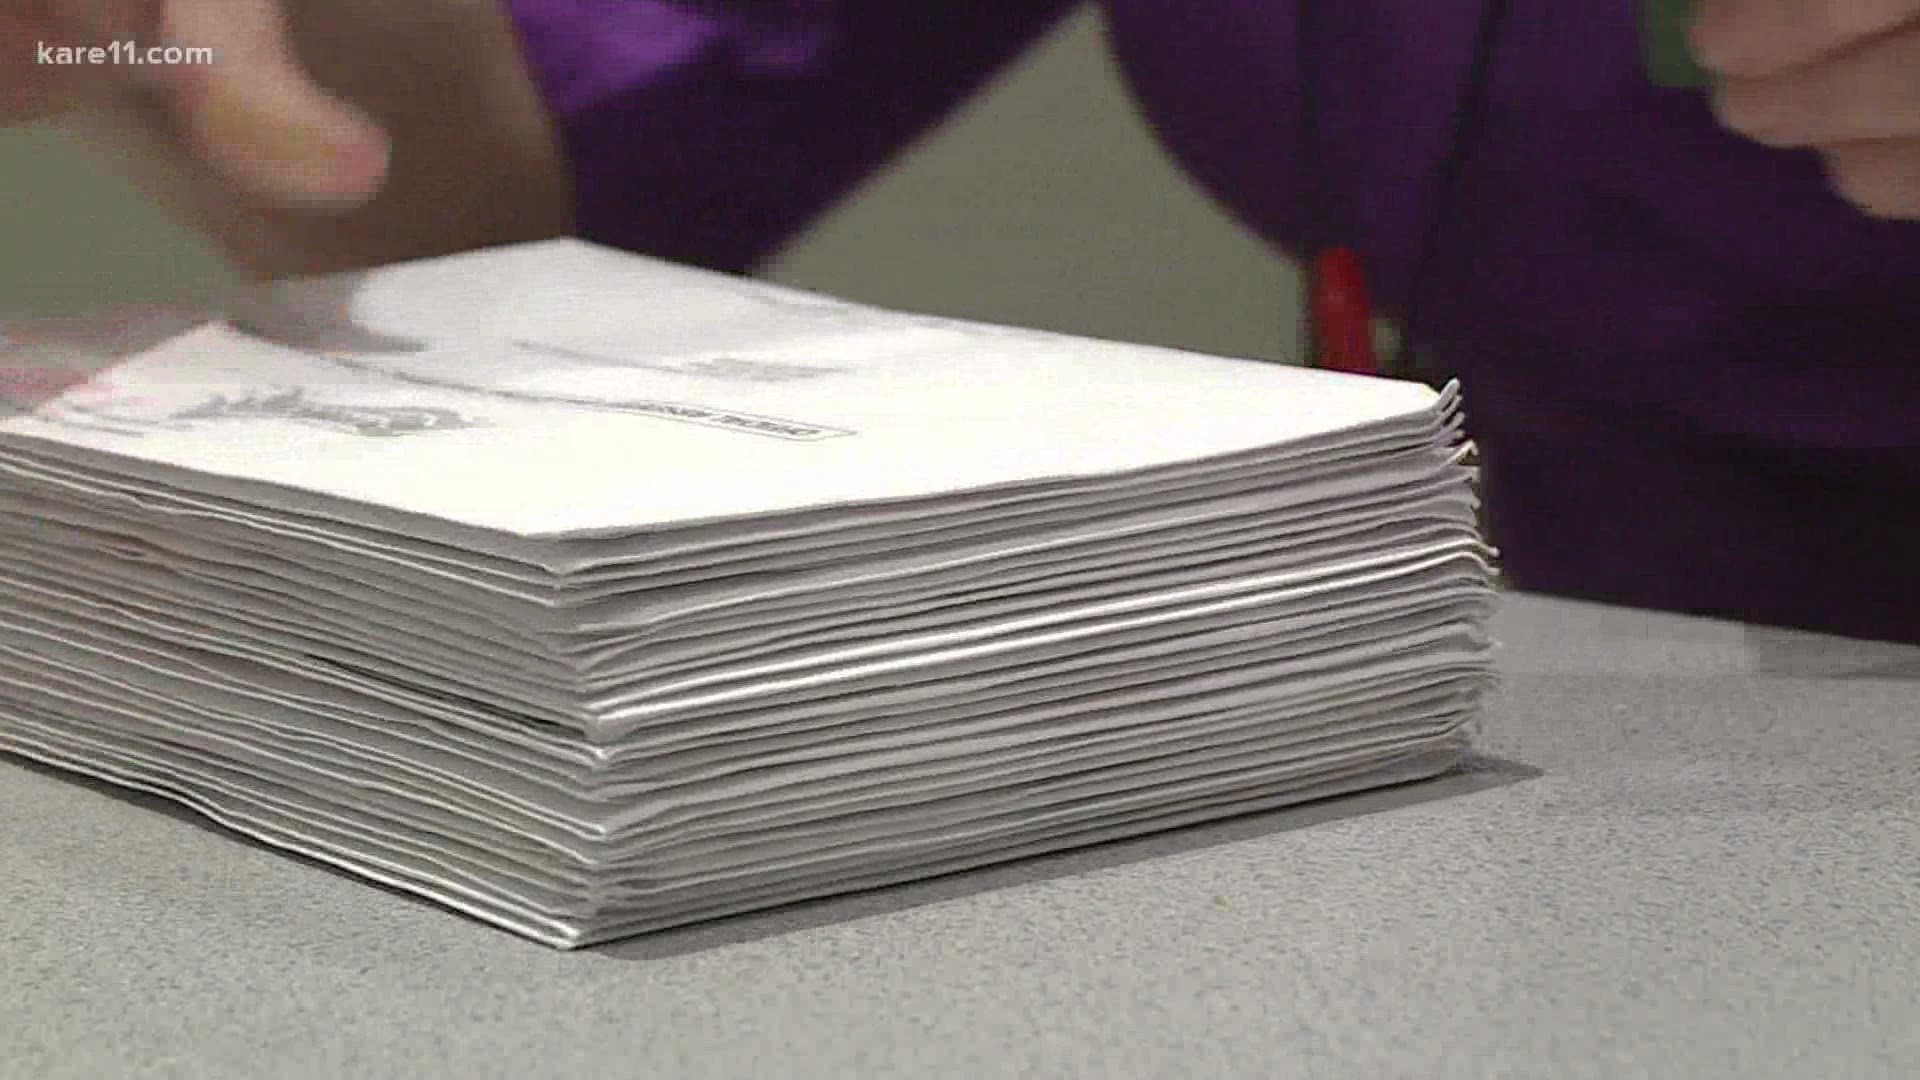 KARE 11 decided to follow the ballots at a Twin Cities area county elections office, to see the process and security measures from start to finish.